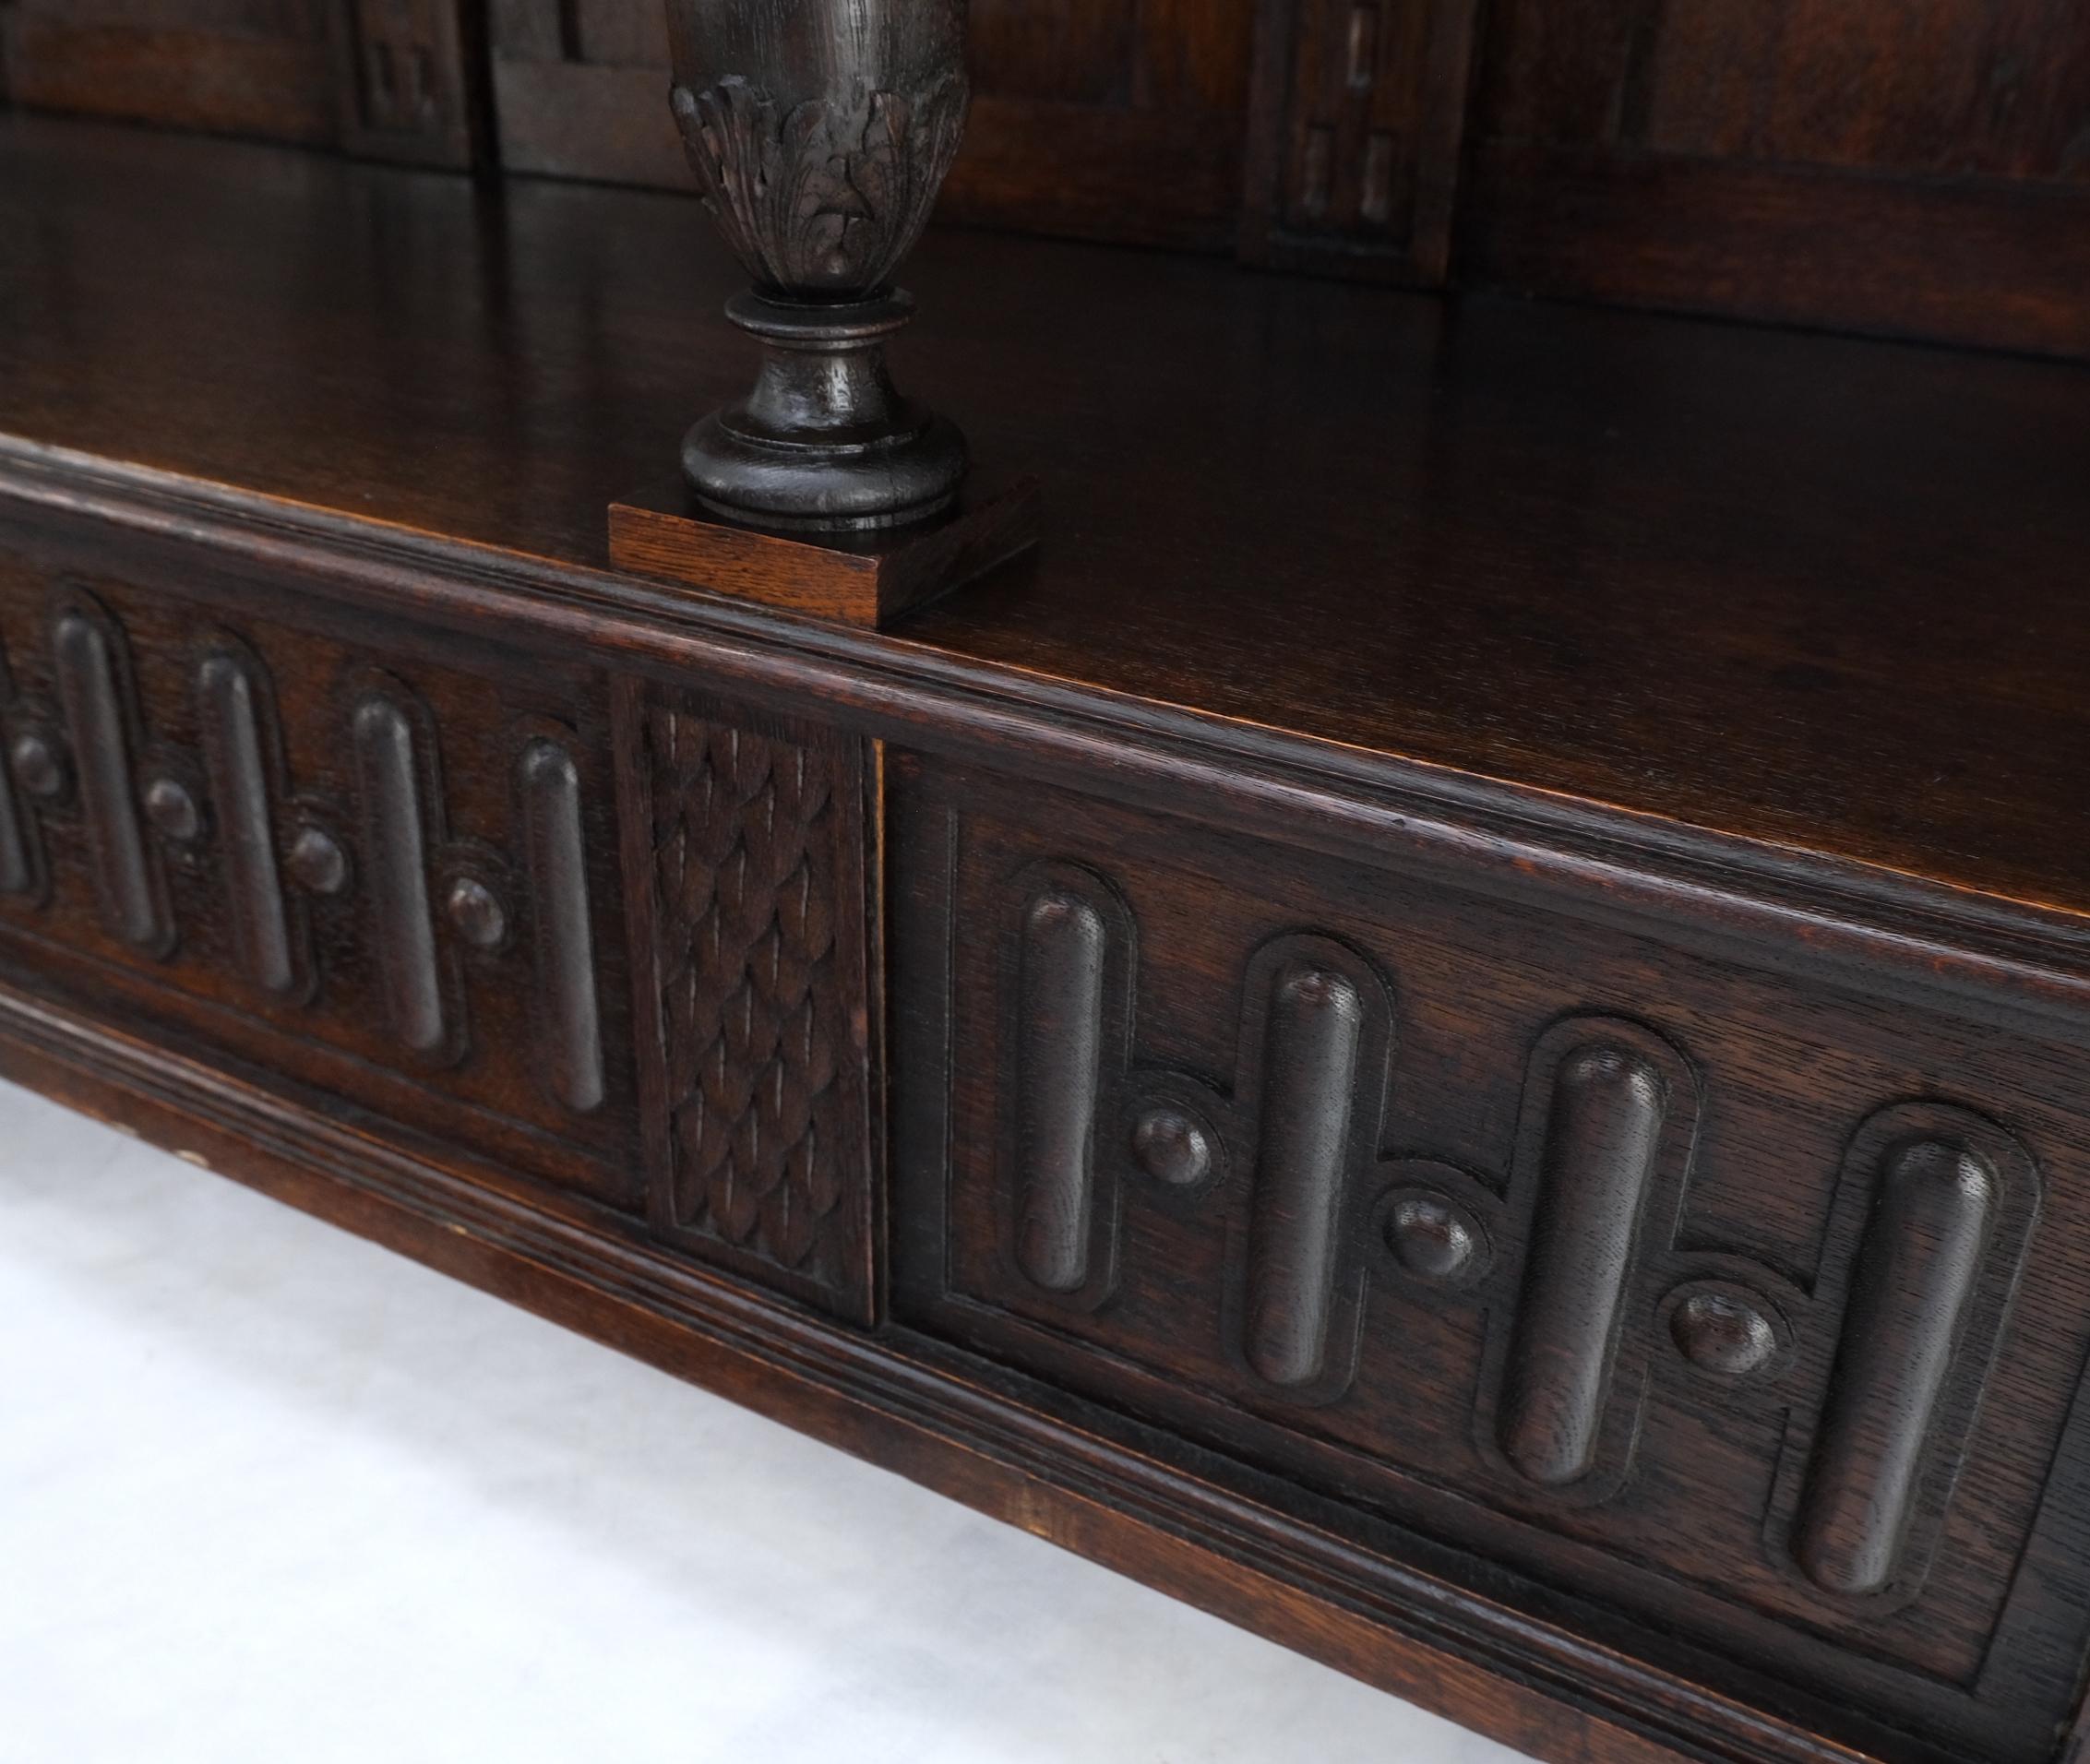 Carved Oak Jacobean Style 3 Doors Drawers Server Credenza Cabinet Cupboard Mint In Good Condition For Sale In Rockaway, NJ